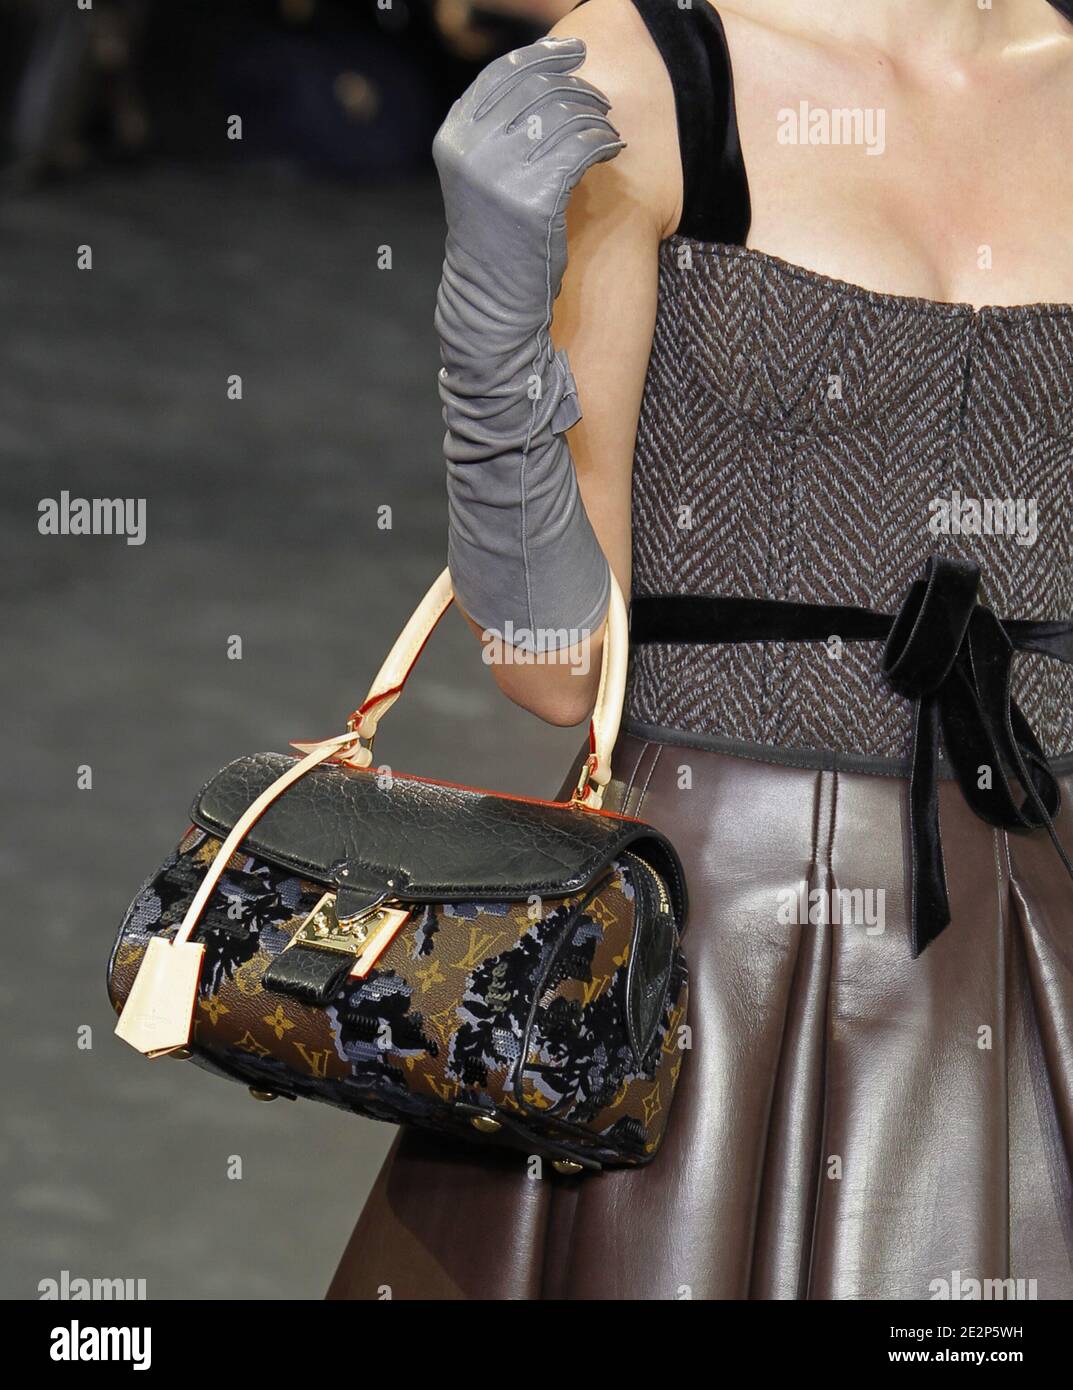 A model holds a handbag designed by Marc Jacobs for Louis Vuitton